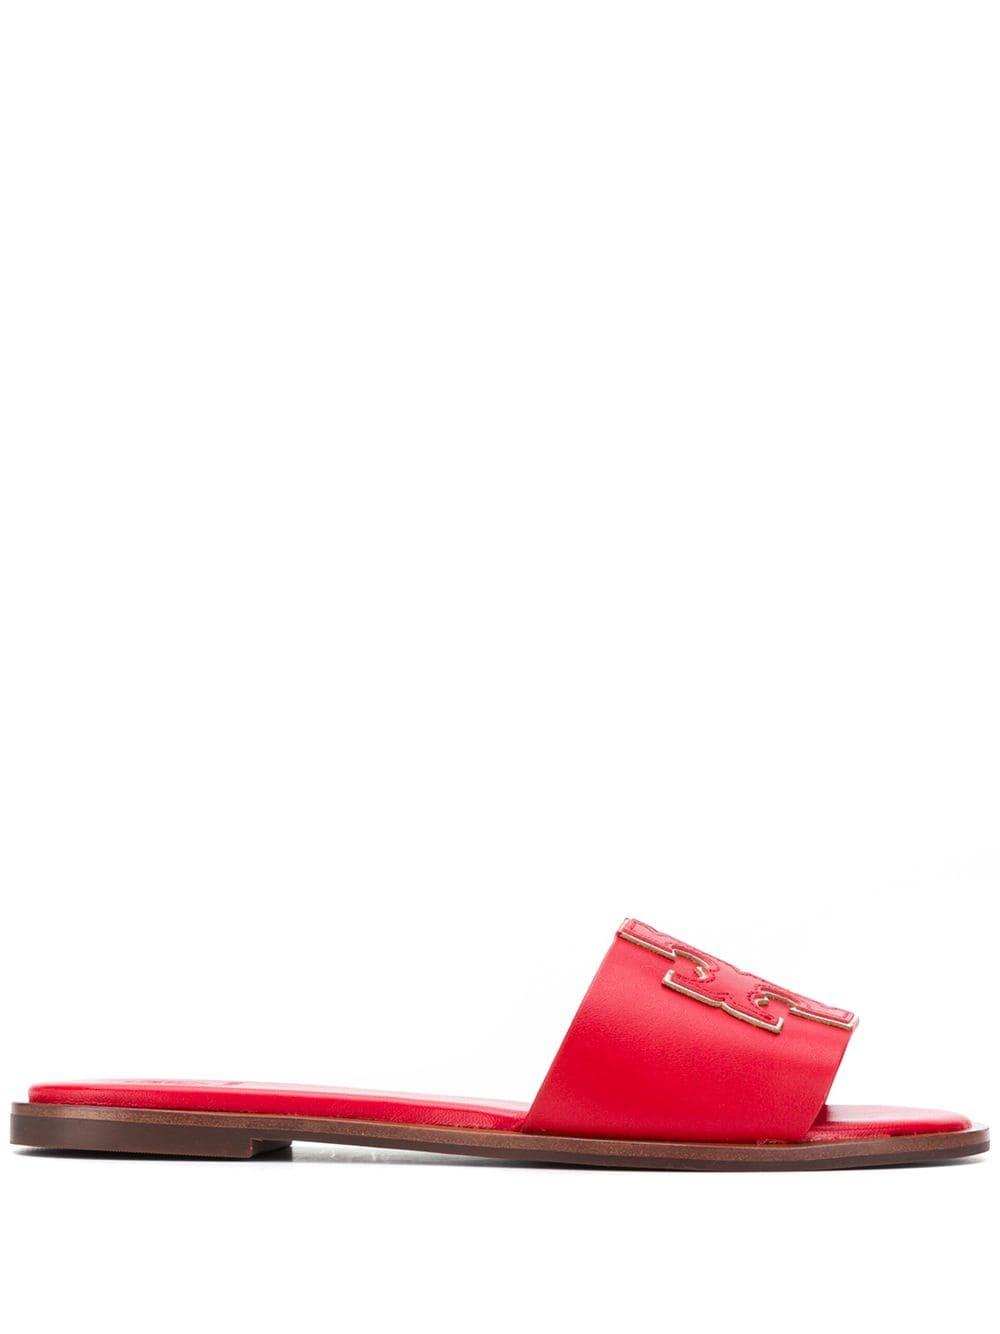 Tory Burch Leather Ines Slide in Red - Lyst